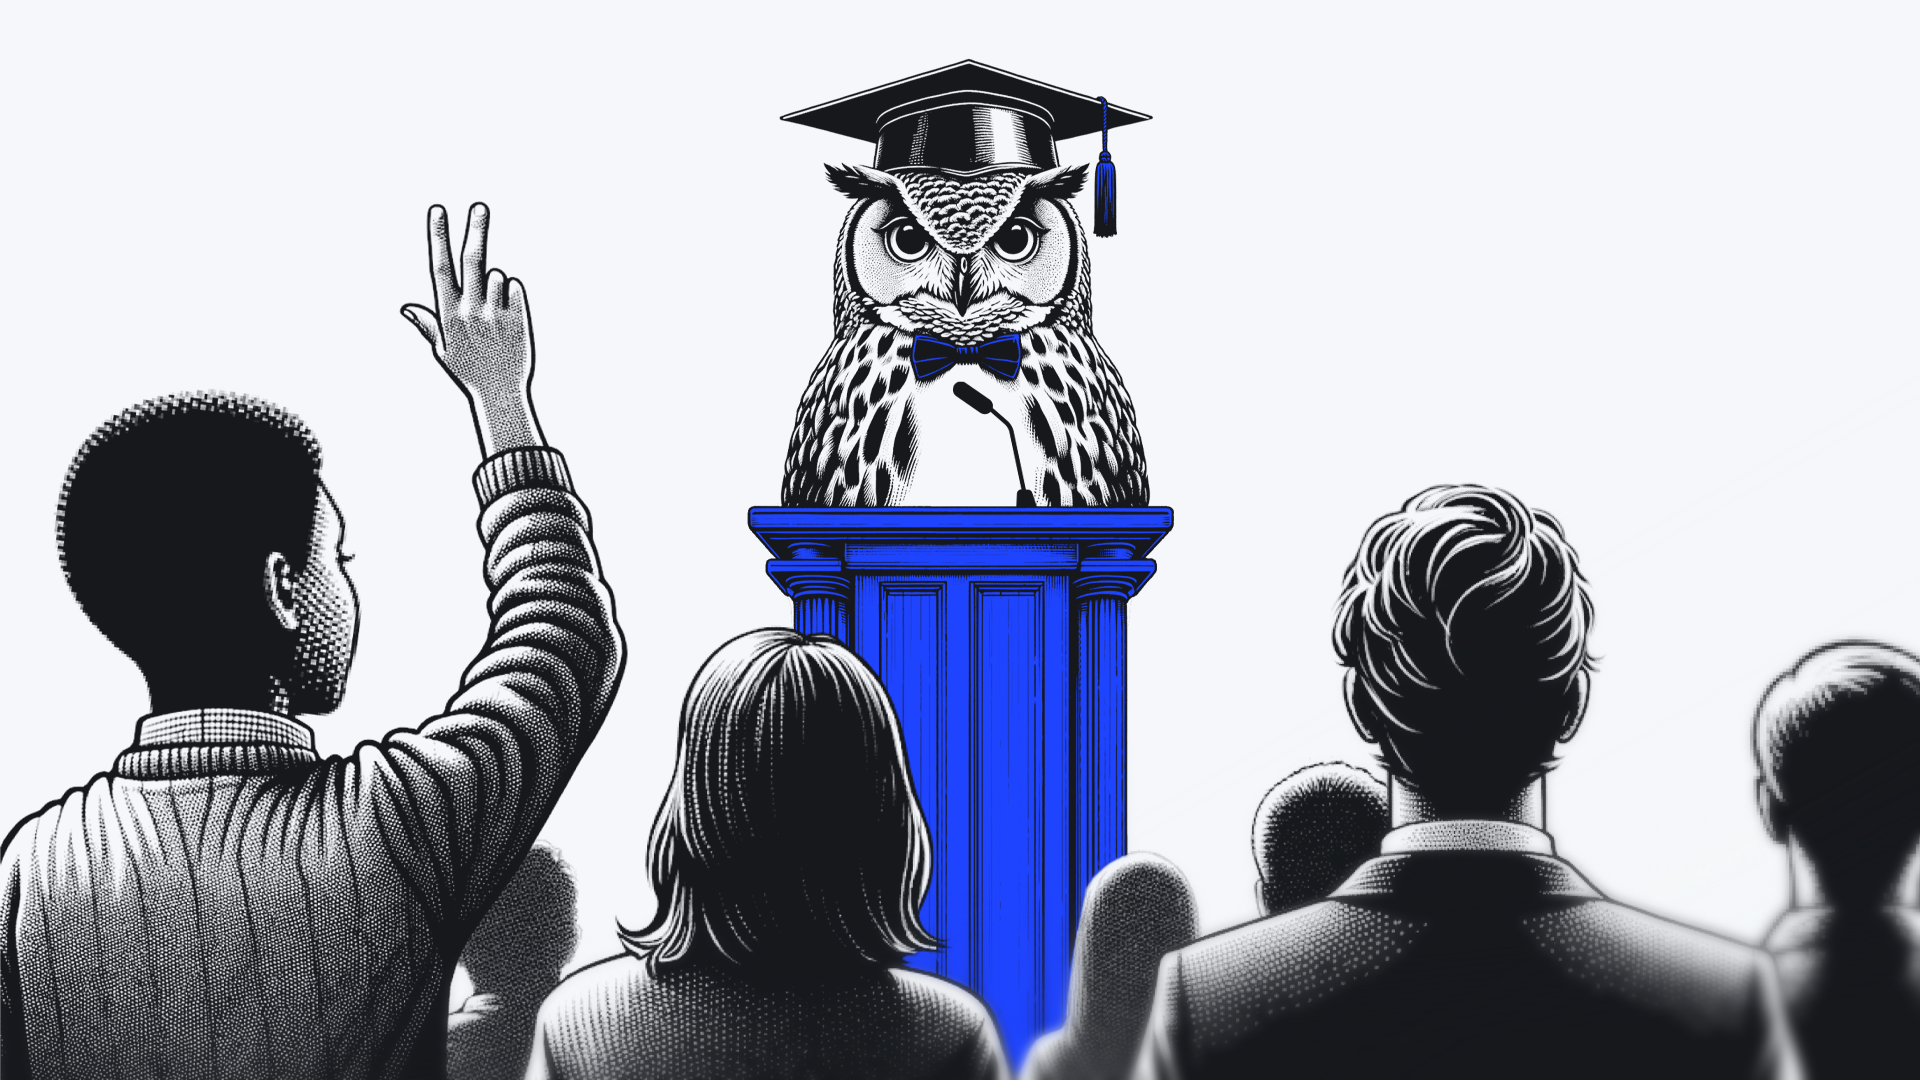 An owl wearing a graduation cap lectures students, one of whom raises a hand to ask a question.